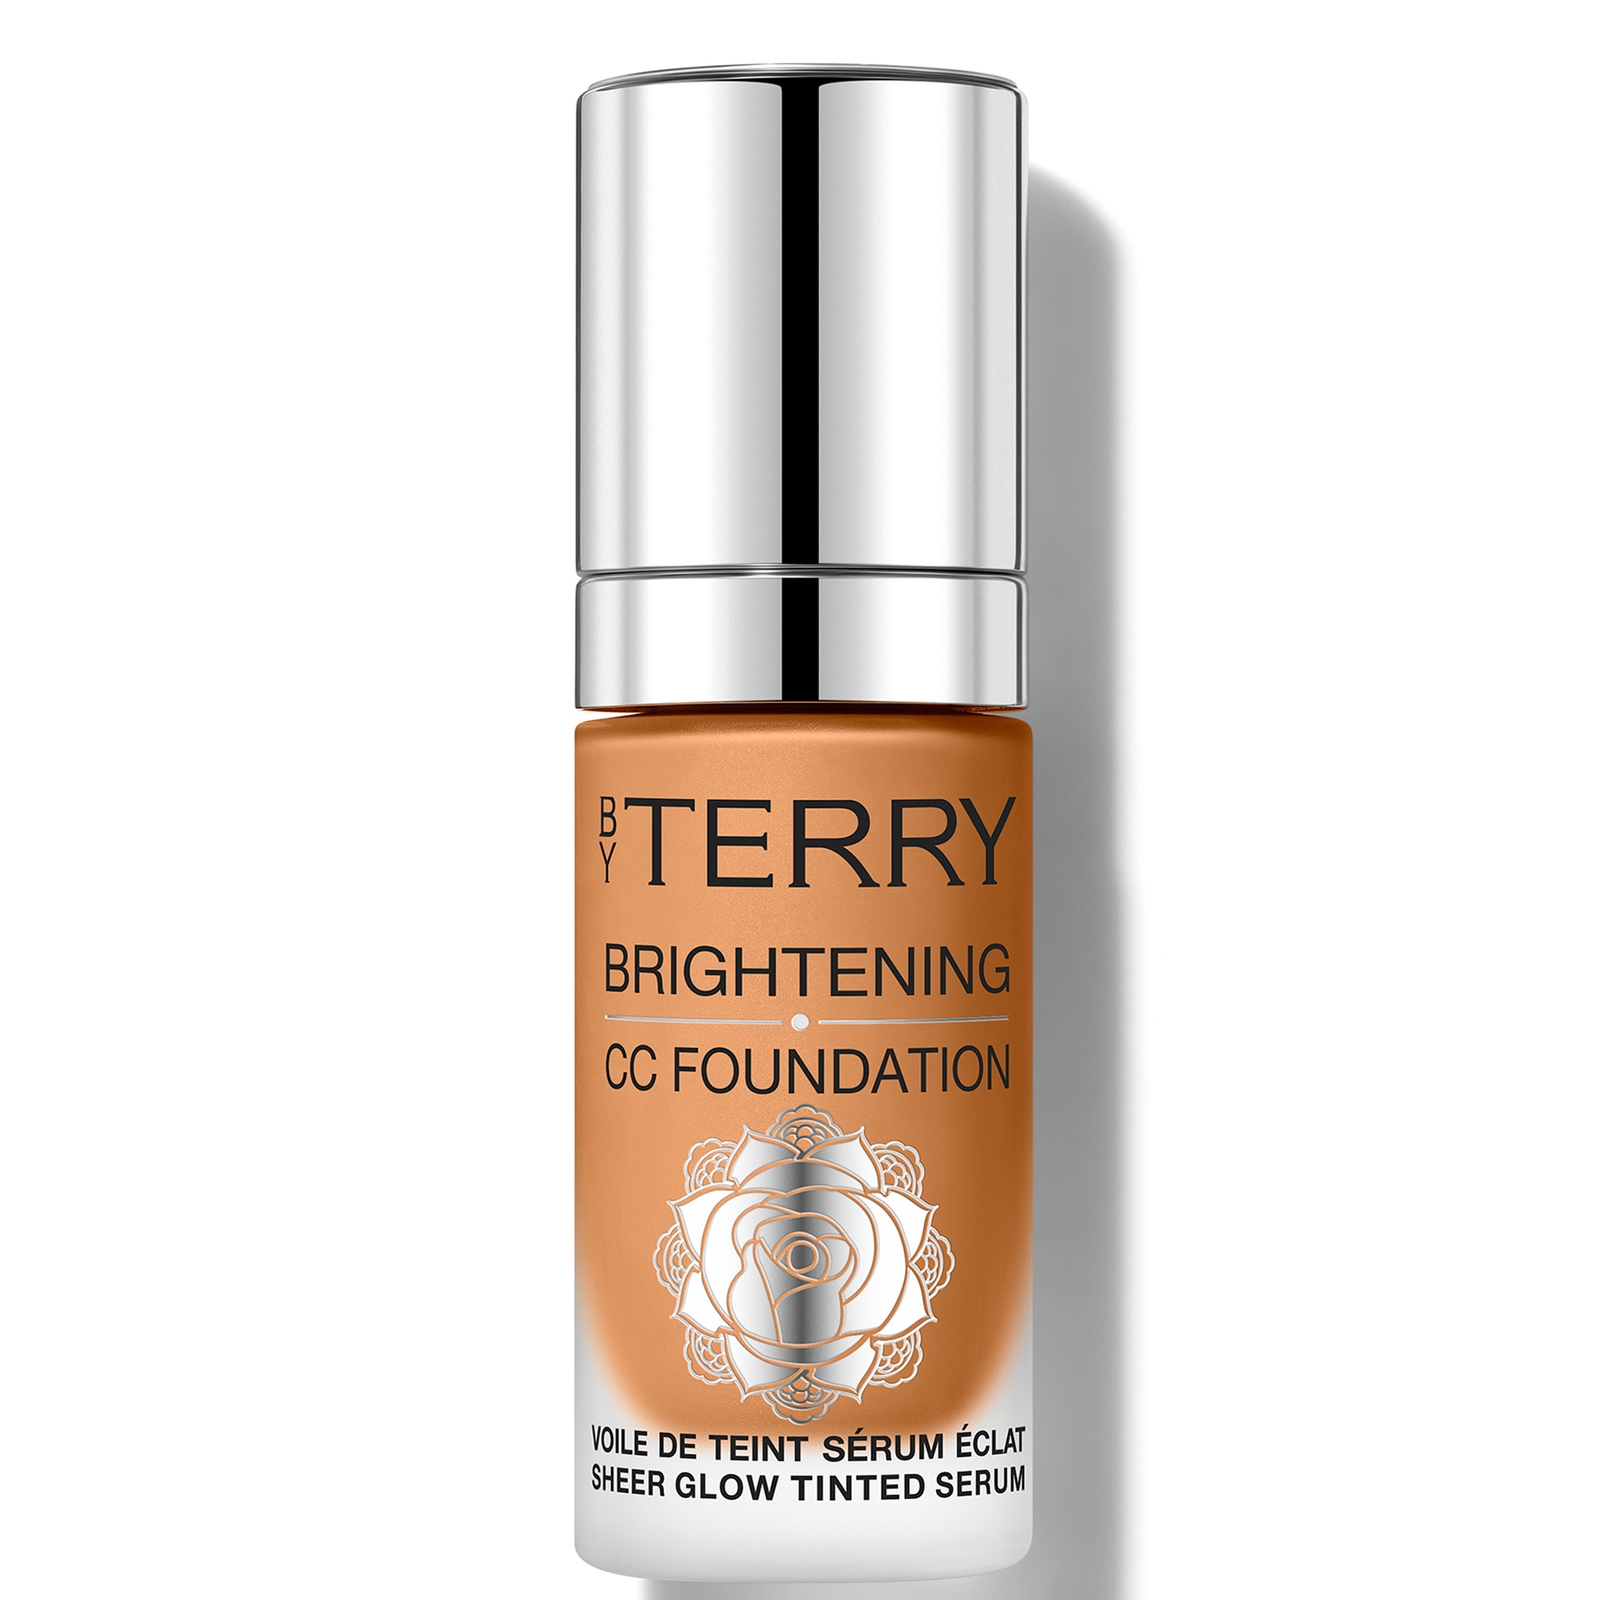 Image of By Terry Brightening CC Foundation 30ml (Various Shades) - 6W - TAN WARM